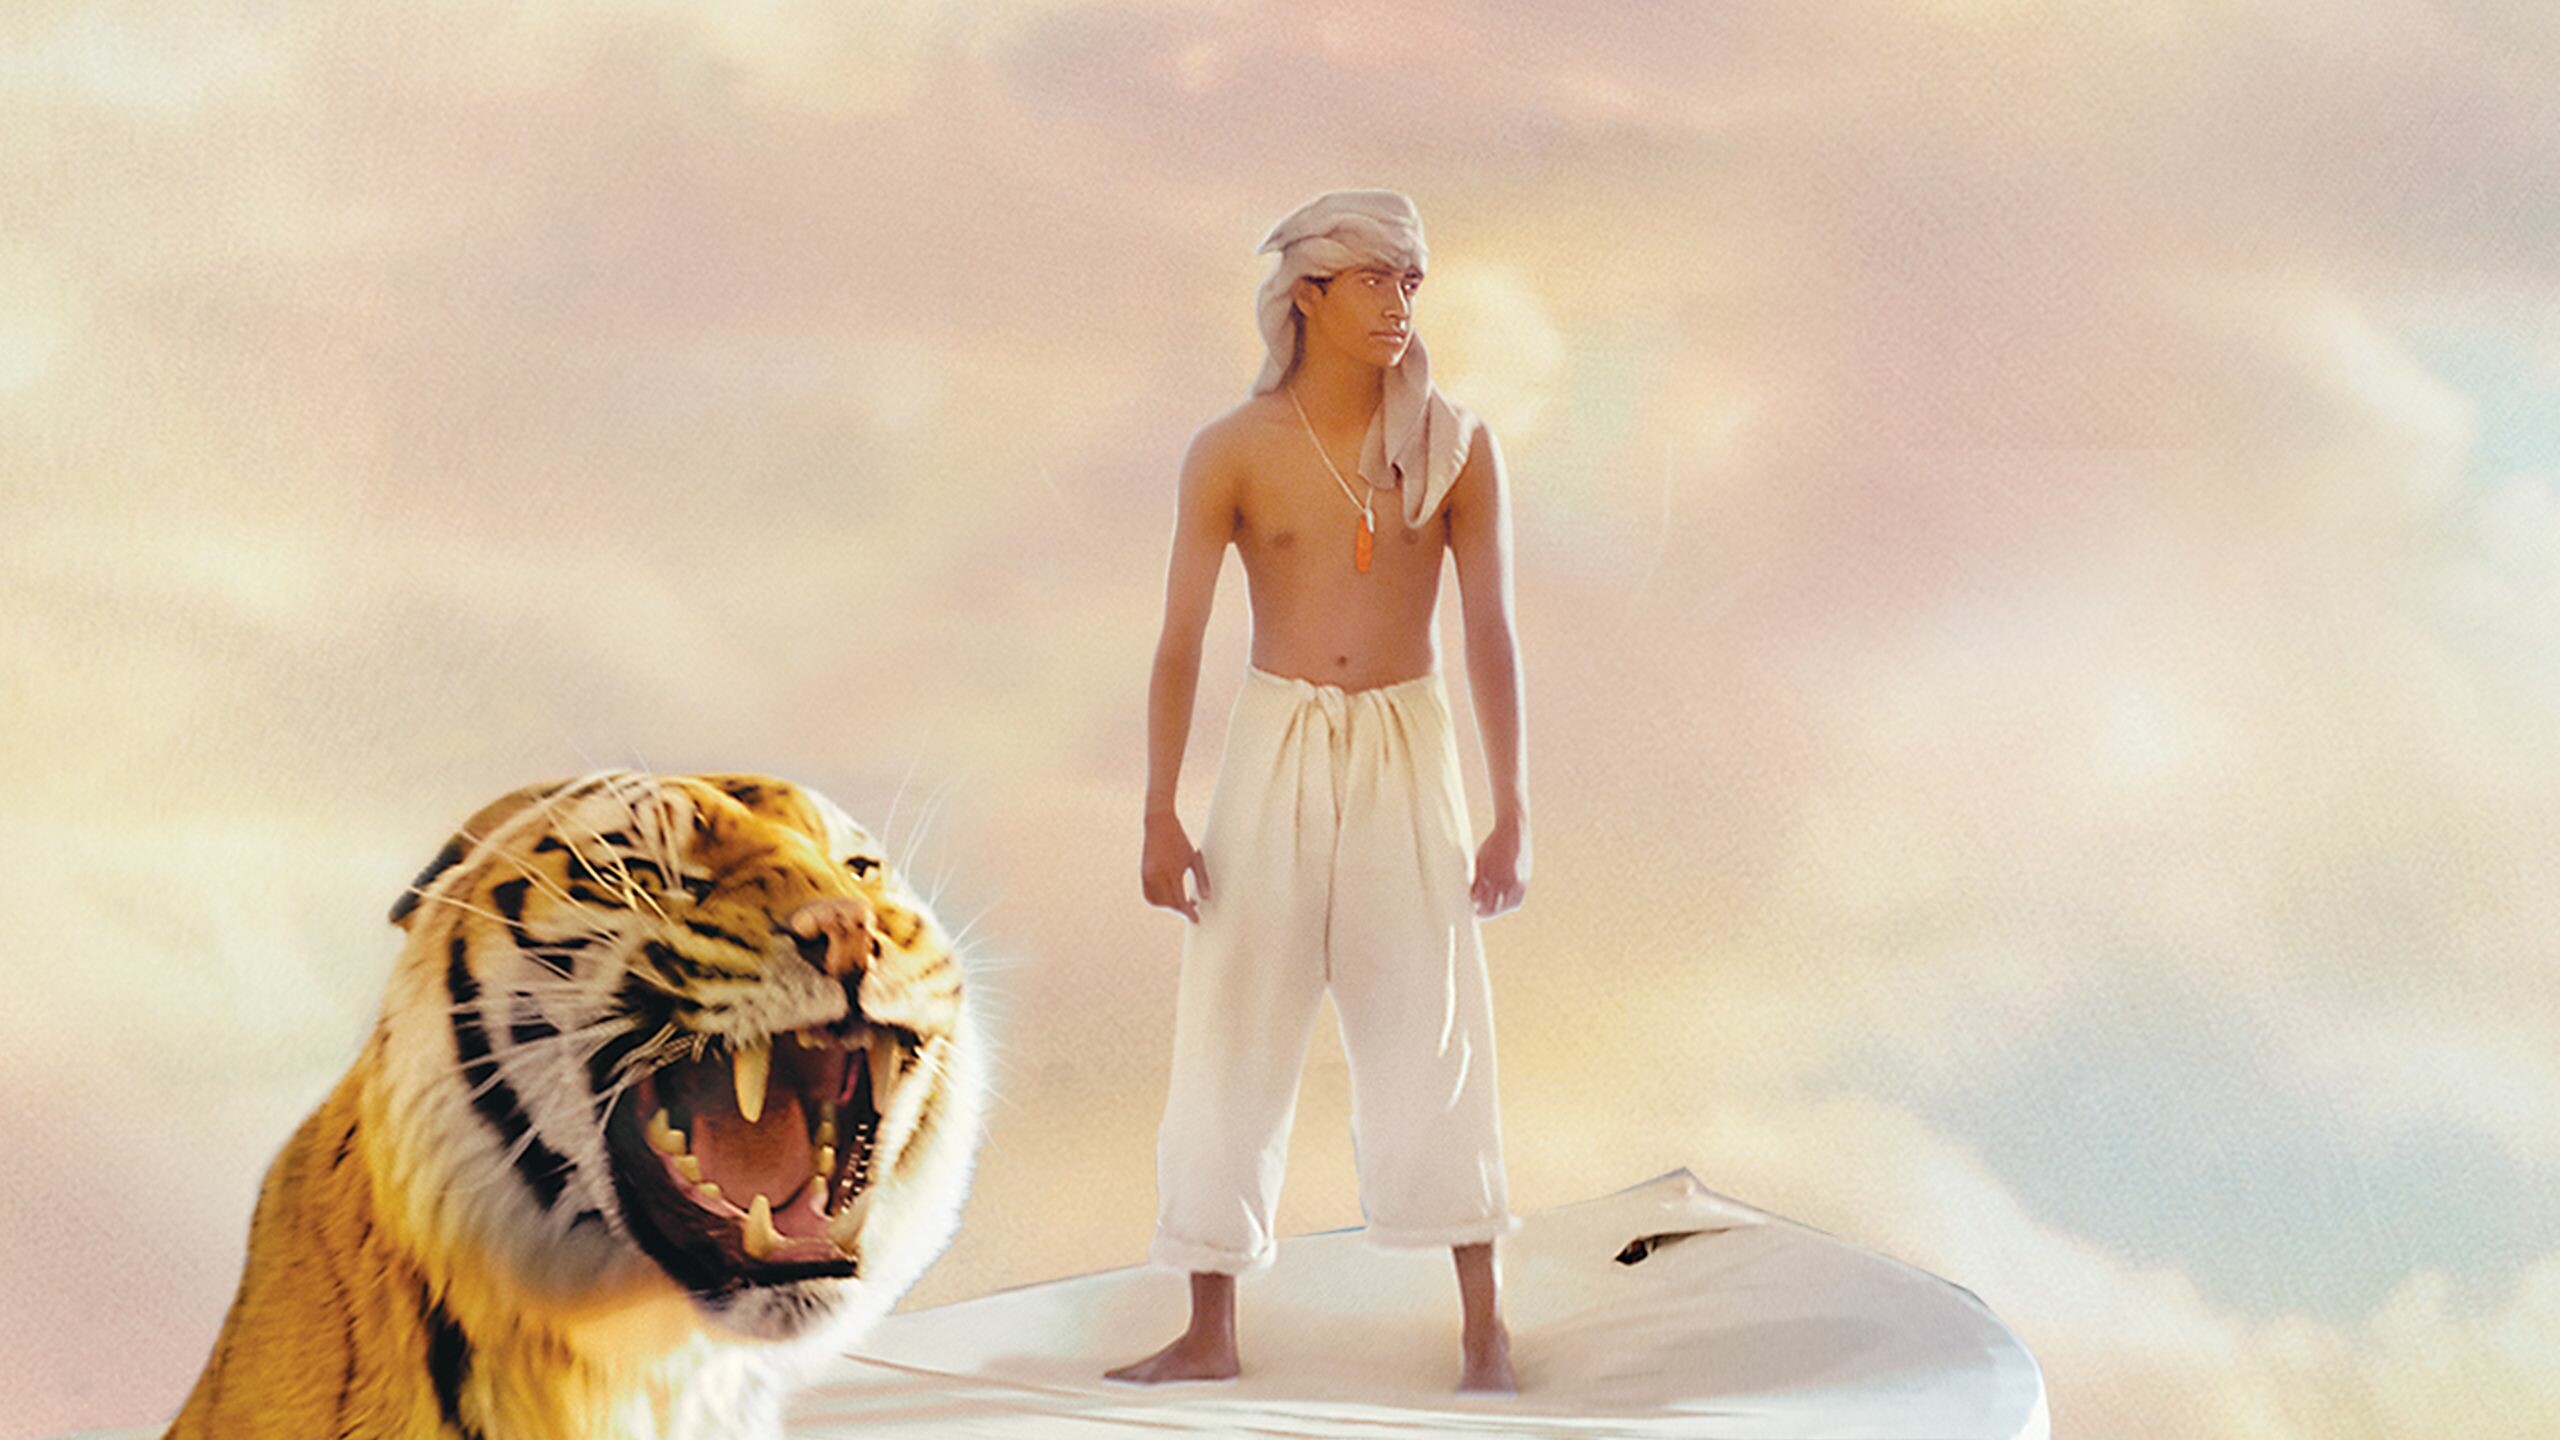 Life of Pi: The story involves the 227 days that its teenage hero spends drifting across the Pacific in a lifeboat with a Bengal tiger. 2560x1440 HD Wallpaper.